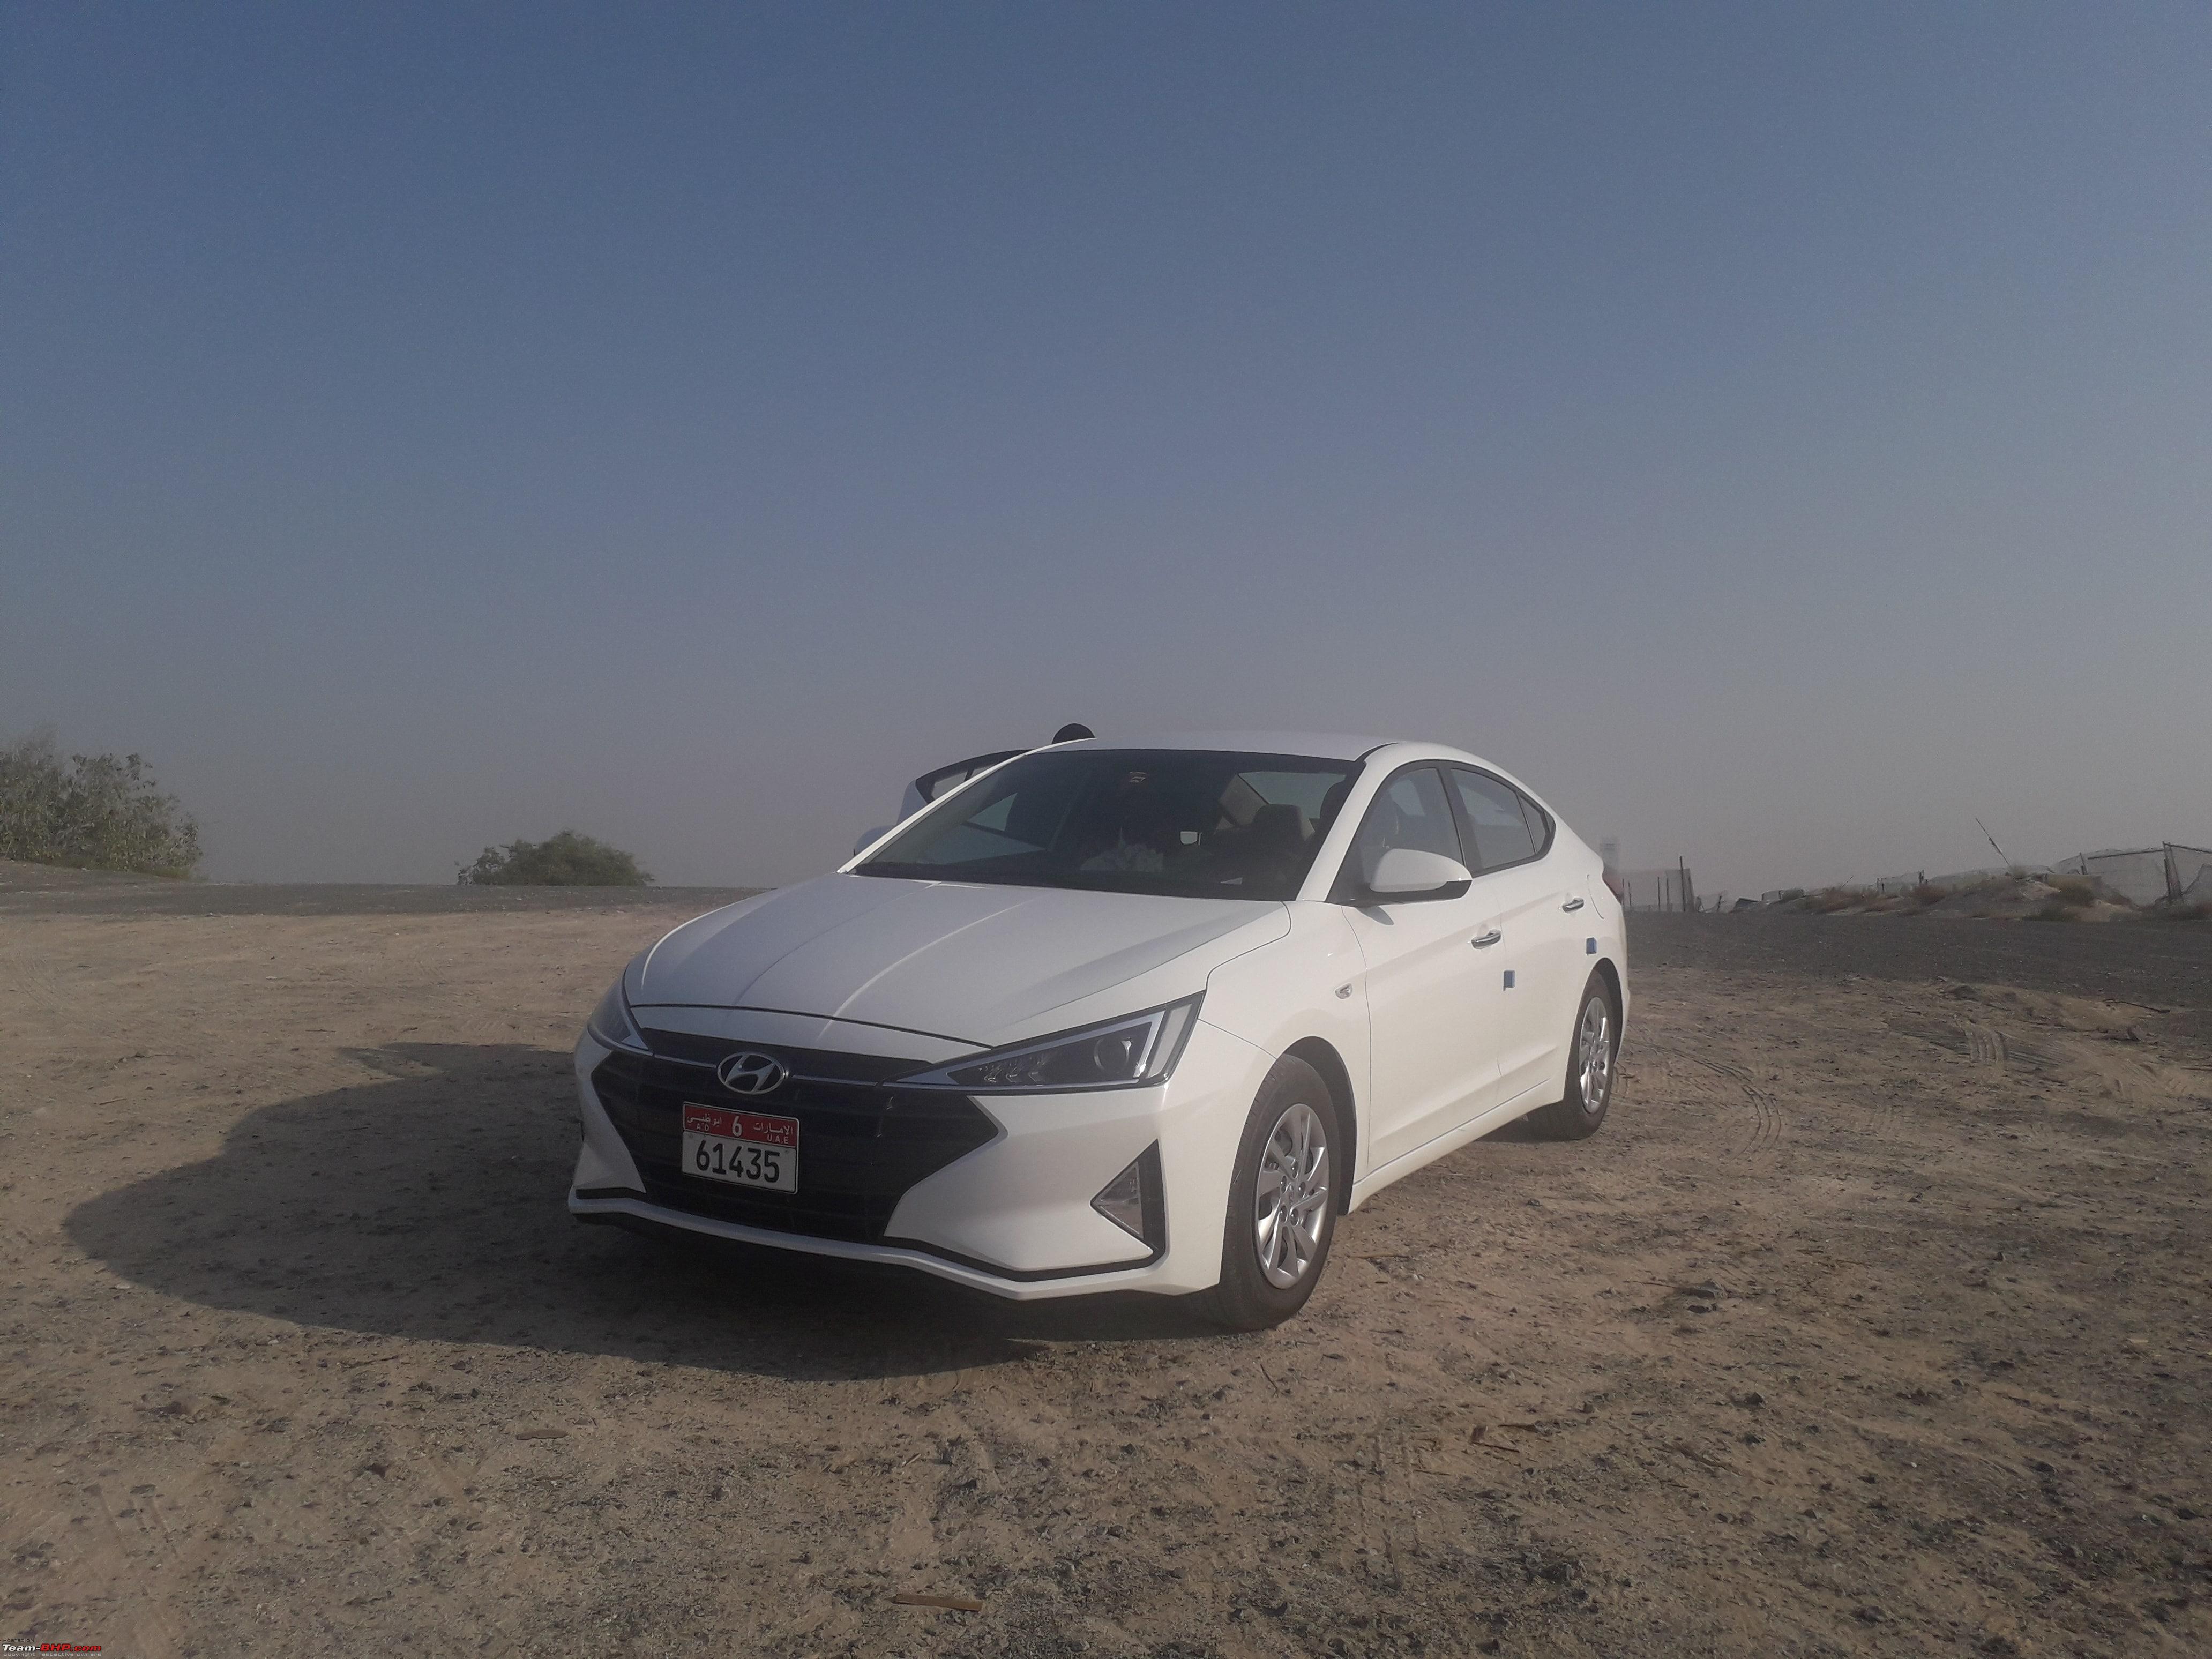 Rent a Hyundai Cars in Bangalore from Revv in 2022 - Benefits, Features and  How to Book